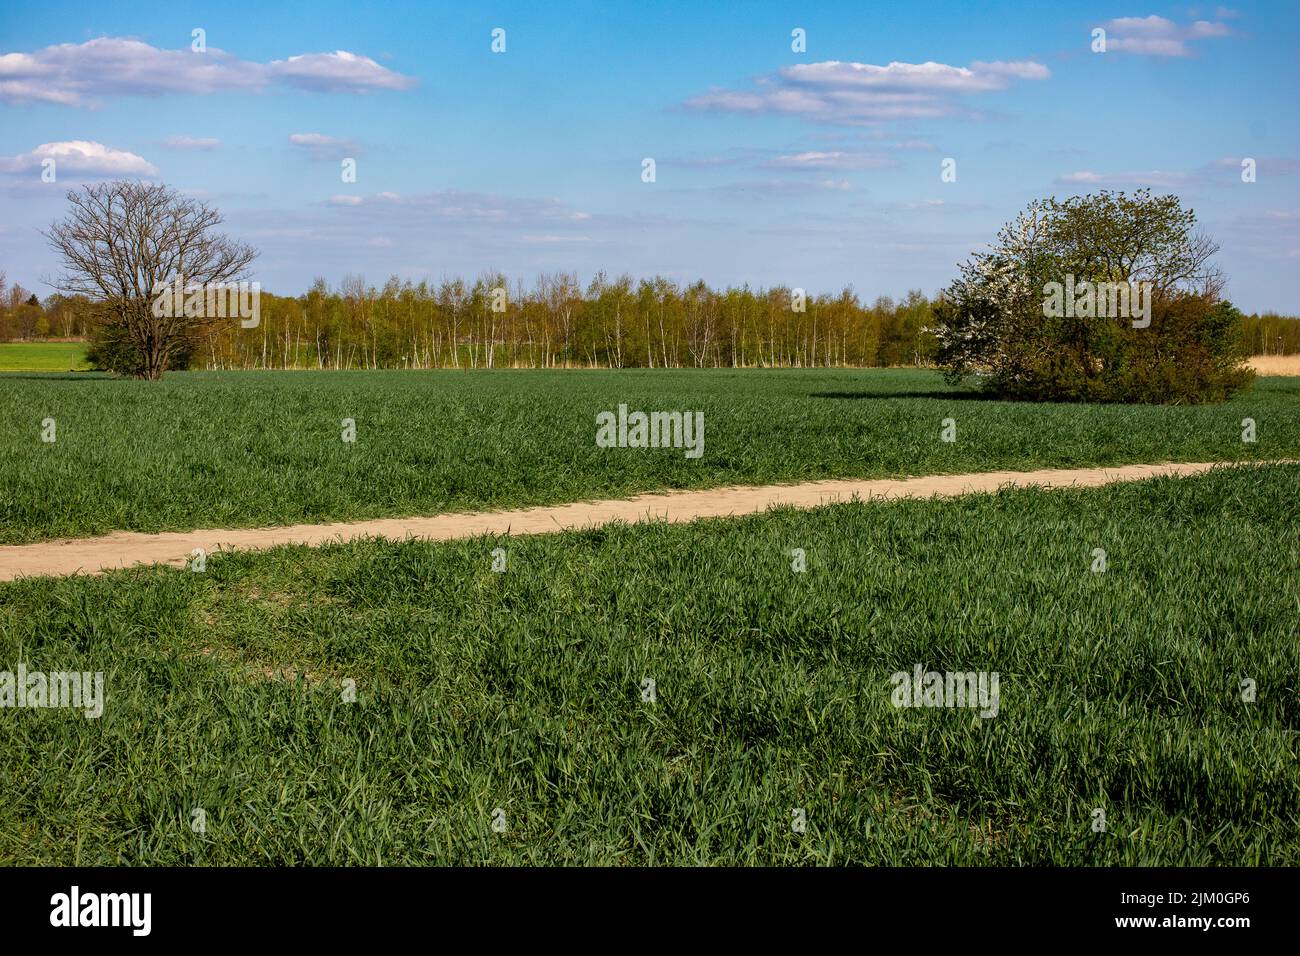 A suburb of Gropiusstadt locality in Berlin Stock Photo